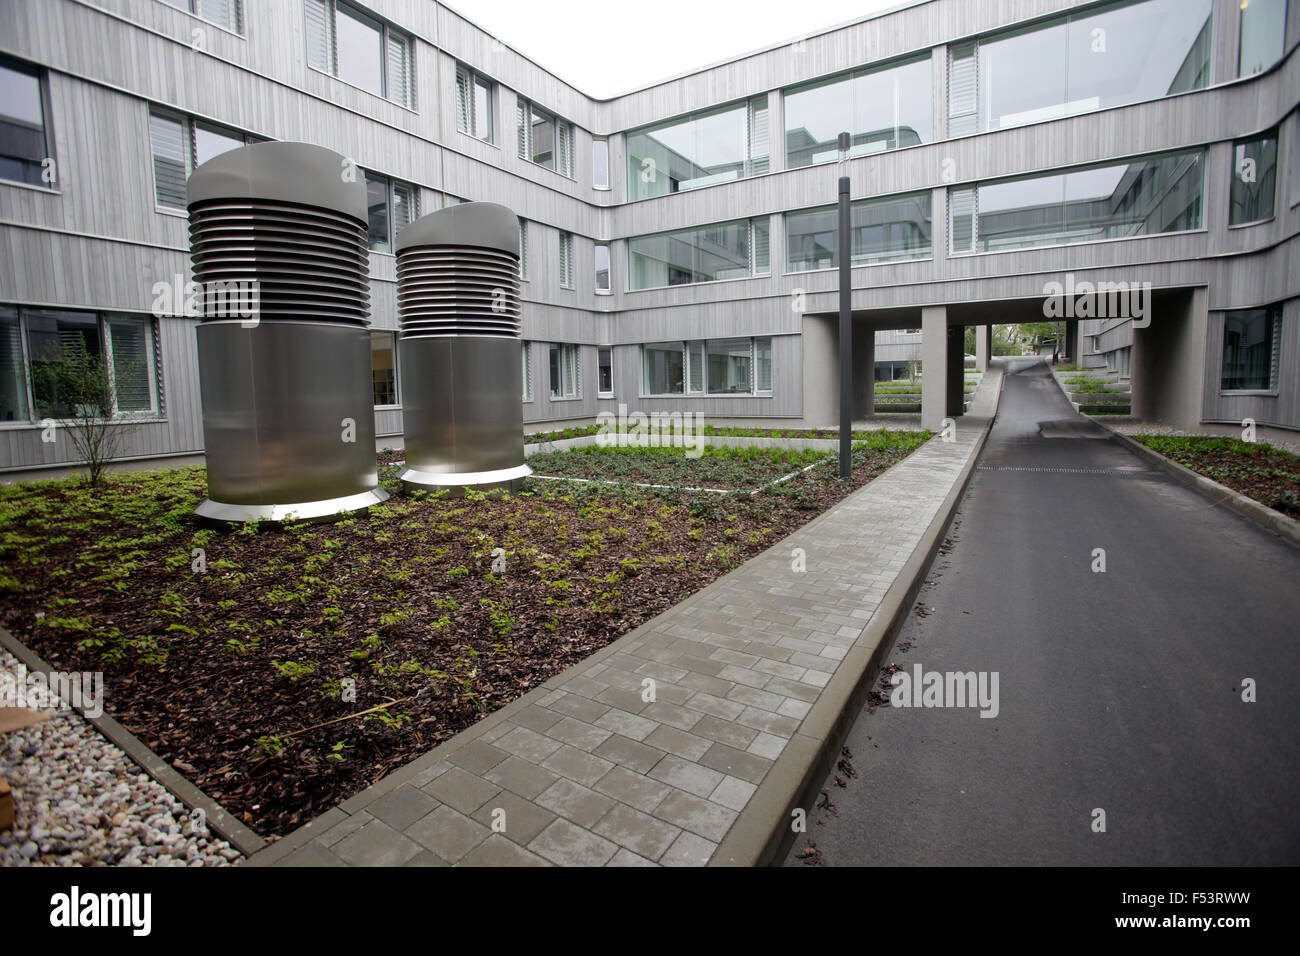 27.04.2015, Berlin, Berlin, Germany - Freie UniversitŠt (FU) Berlin presents the new building for small pockets and the campus library. 0PA150427D795CAROEX.JPG - NOT for SALE in G E R M A N Y, A U S T R I A, S W I T Z E R L A N D [MODEL RELEASE: NOT APPLICABLE, PROPERTY RELEASE: NO (c) caro photo agency / Ponizak, http://www.caro-images.pl, info@carofoto.pl - In case of using the picture for non-journalistic purposes, please contact the agency - the picture is subject to royalty!] Stock Photo